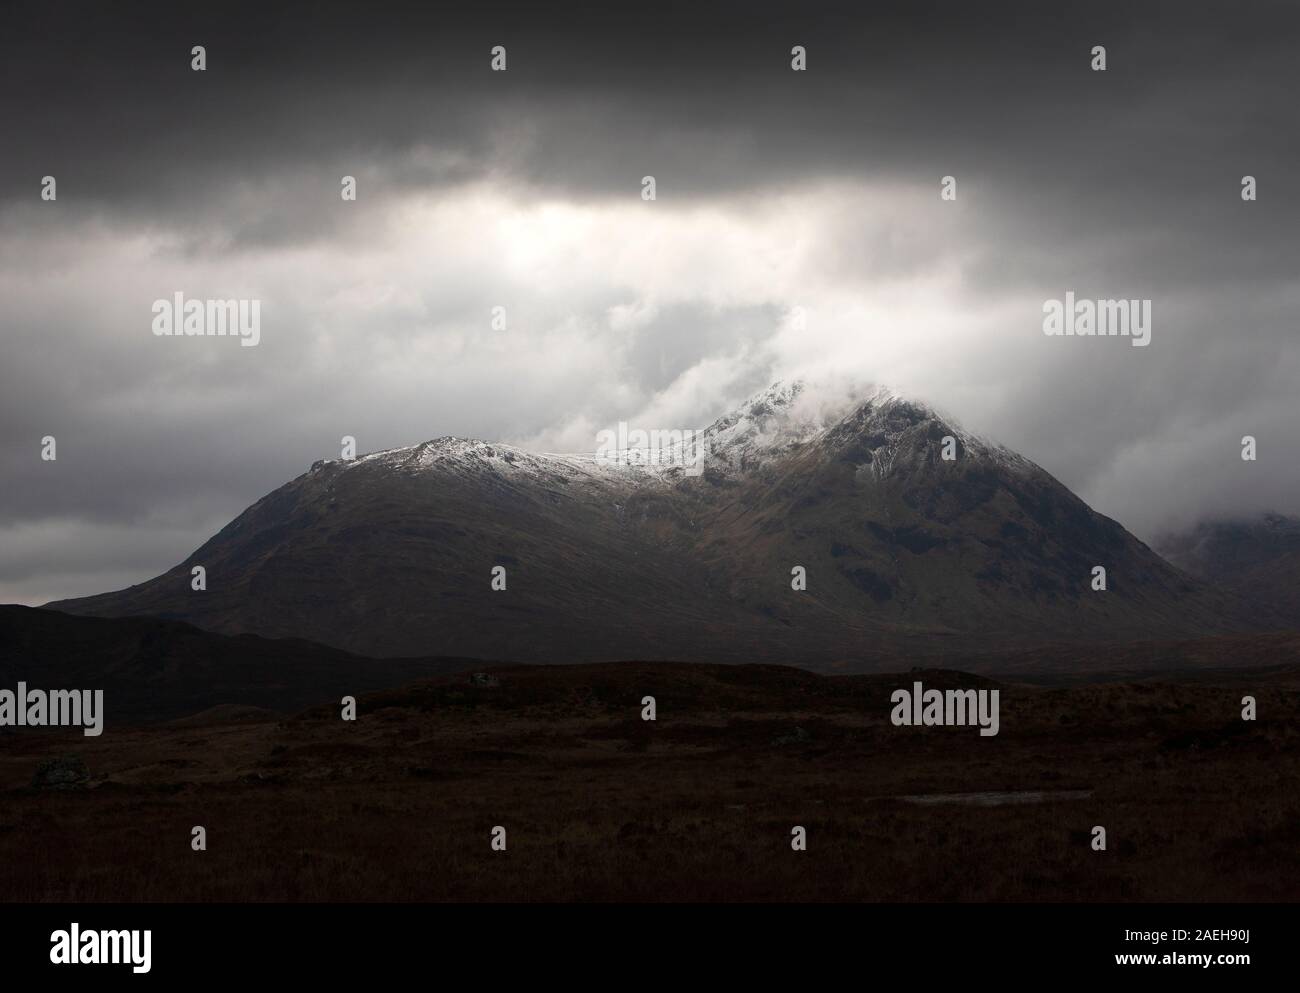 Photograph by © Jamie Callister. The Mountains of Glencoe, North West Scotland, UK, 22nd of November, 2019. Stock Photo